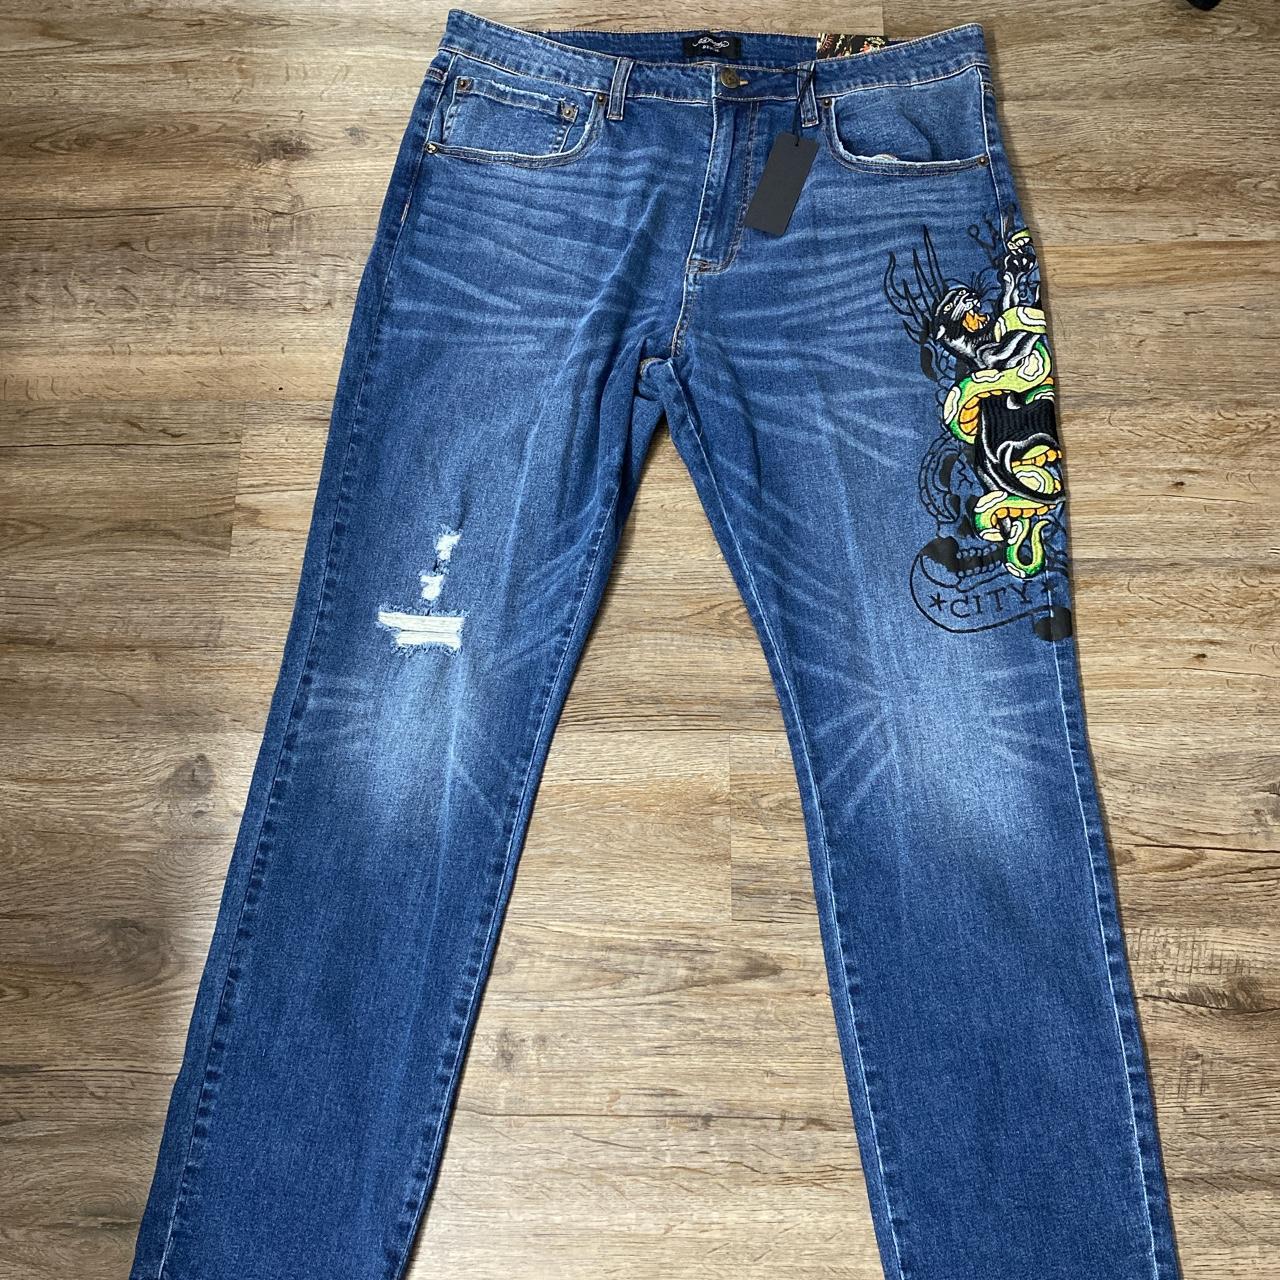 Cool Ed Hardy Men’s Jean No flaws, not worn and with... - Depop